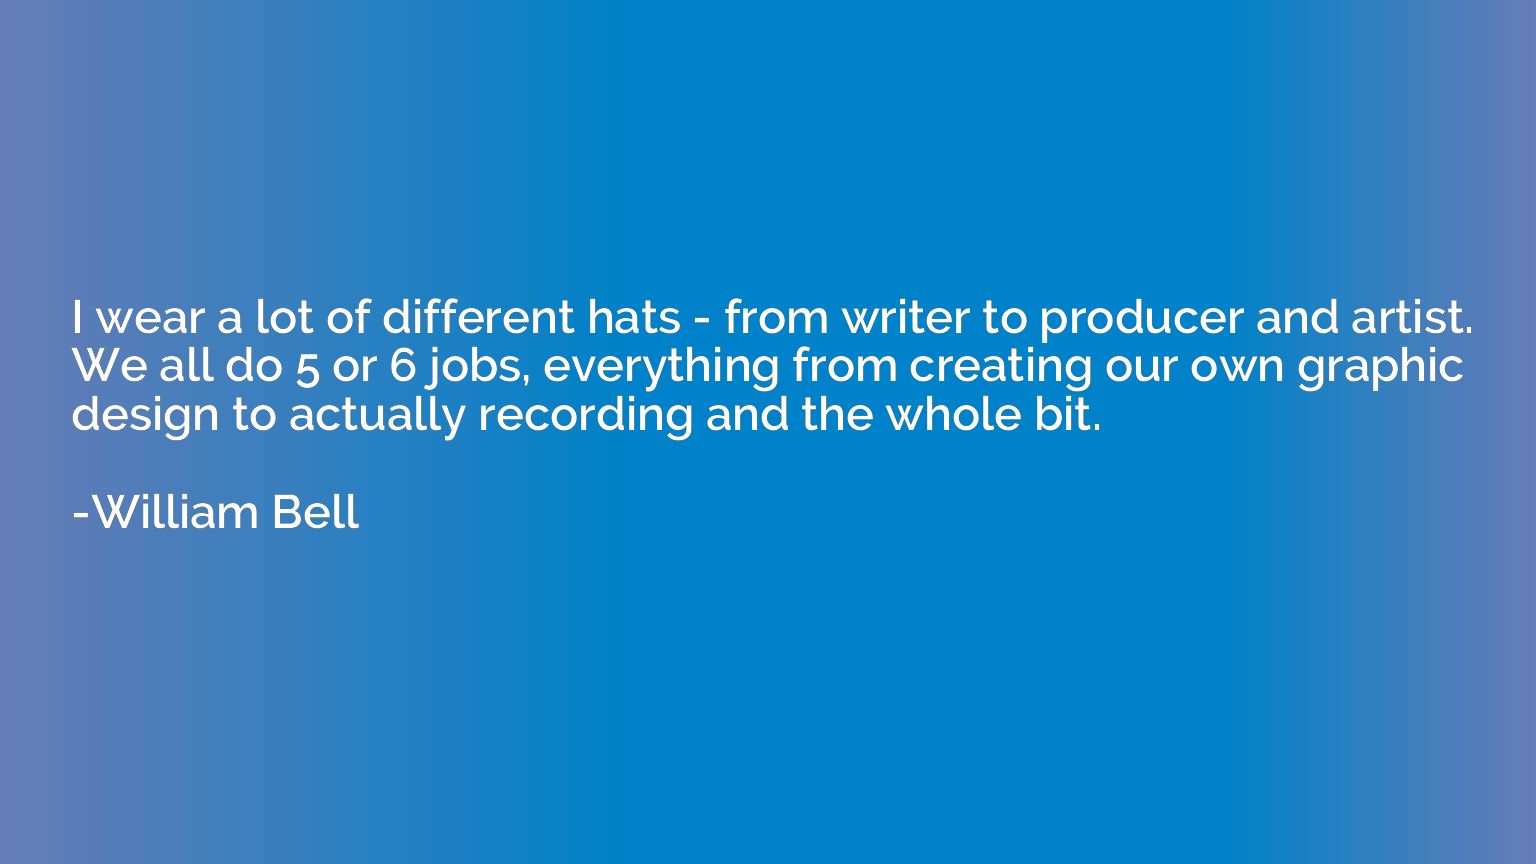 I wear a lot of different hats - from writer to producer and